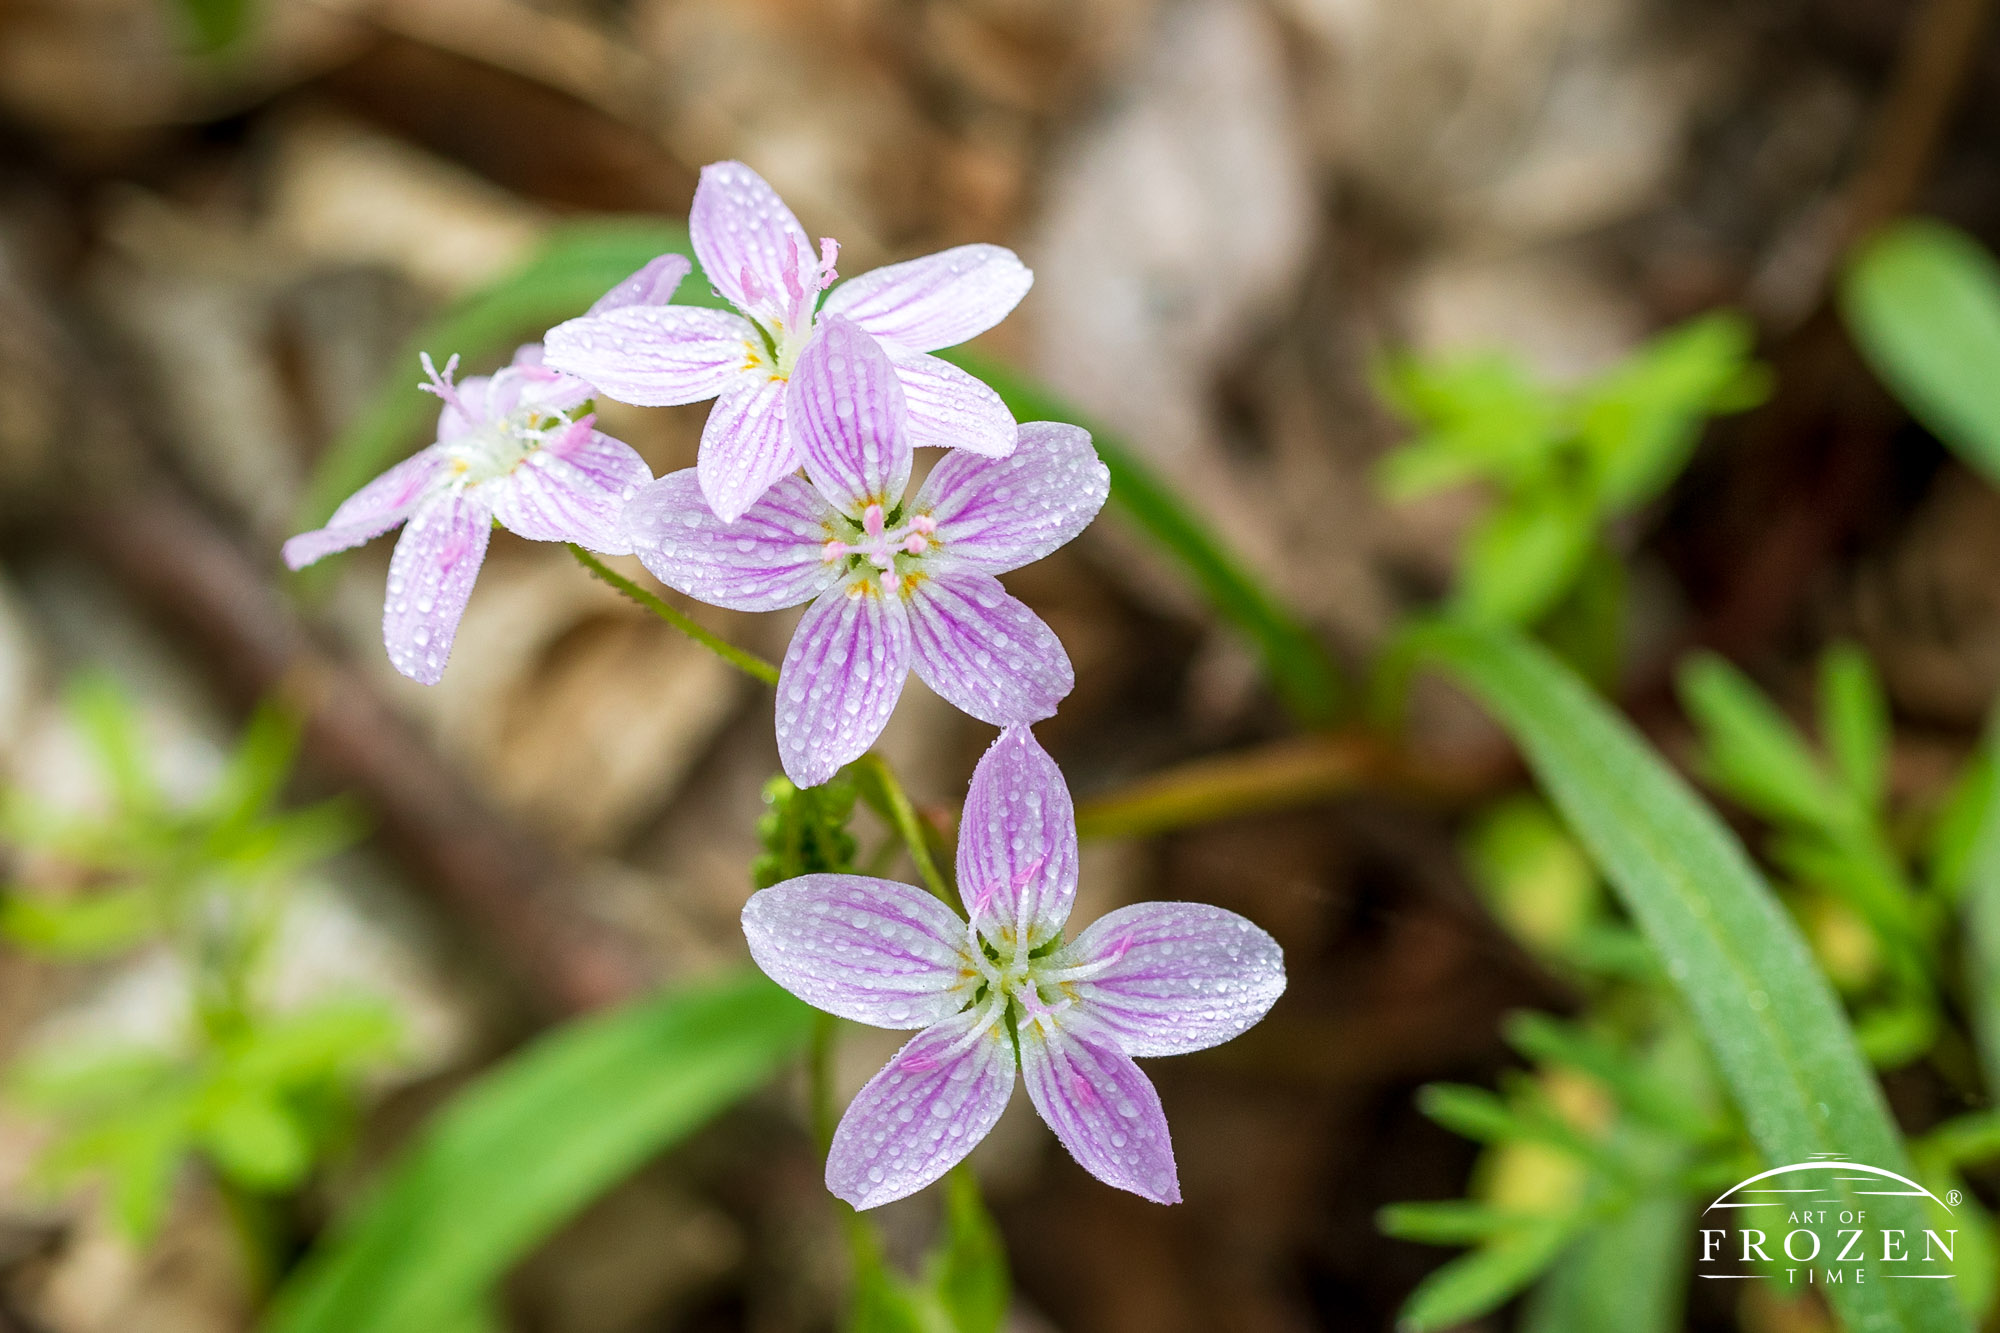 A dainty Ohio wildflower near Bellbrook Ohio whose five white petals display pink stripes giving it the name Easter Spring Beauty